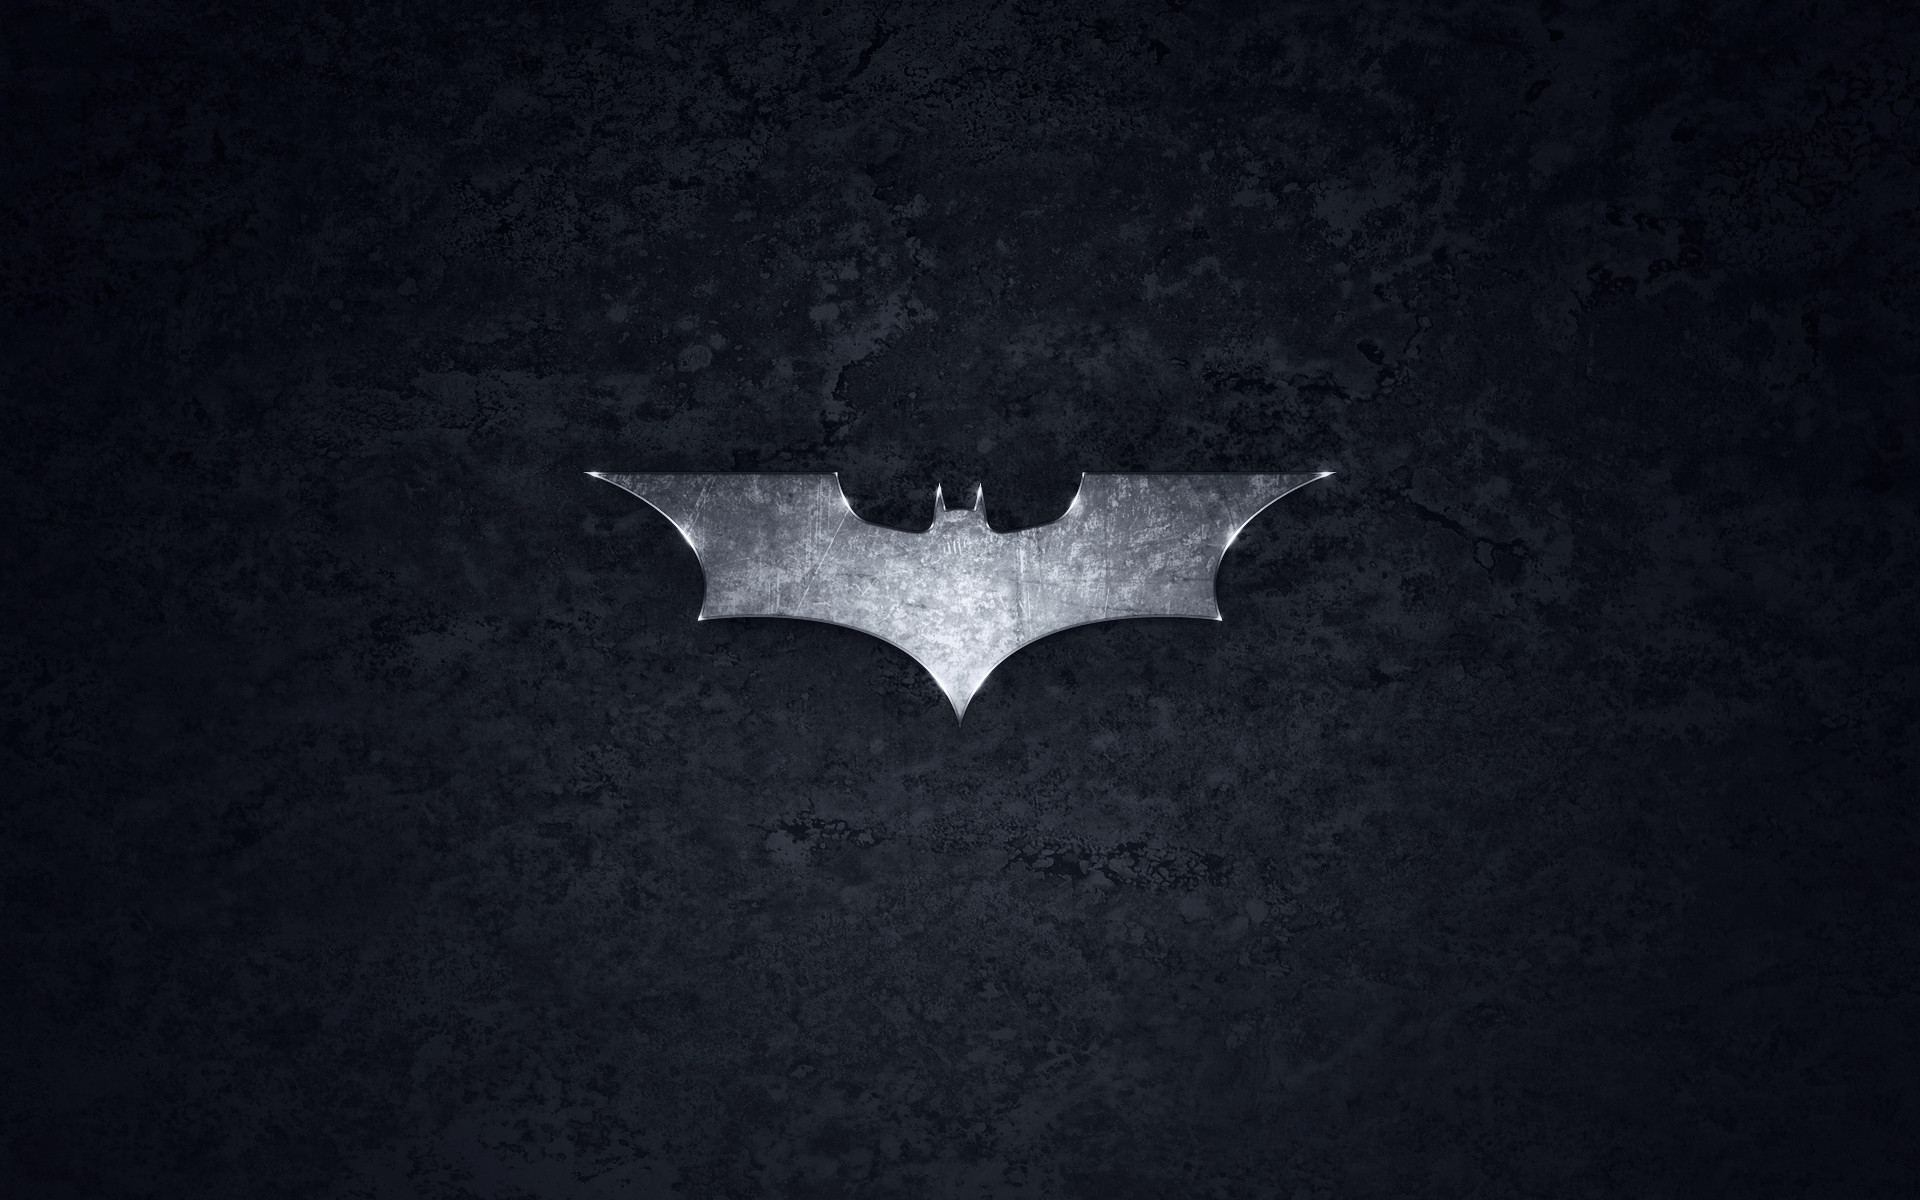 Batman logo wallpaper android with high resolution desktop wallpaper on movies category similar with arkham knight beyond comic iphone joker logo superman